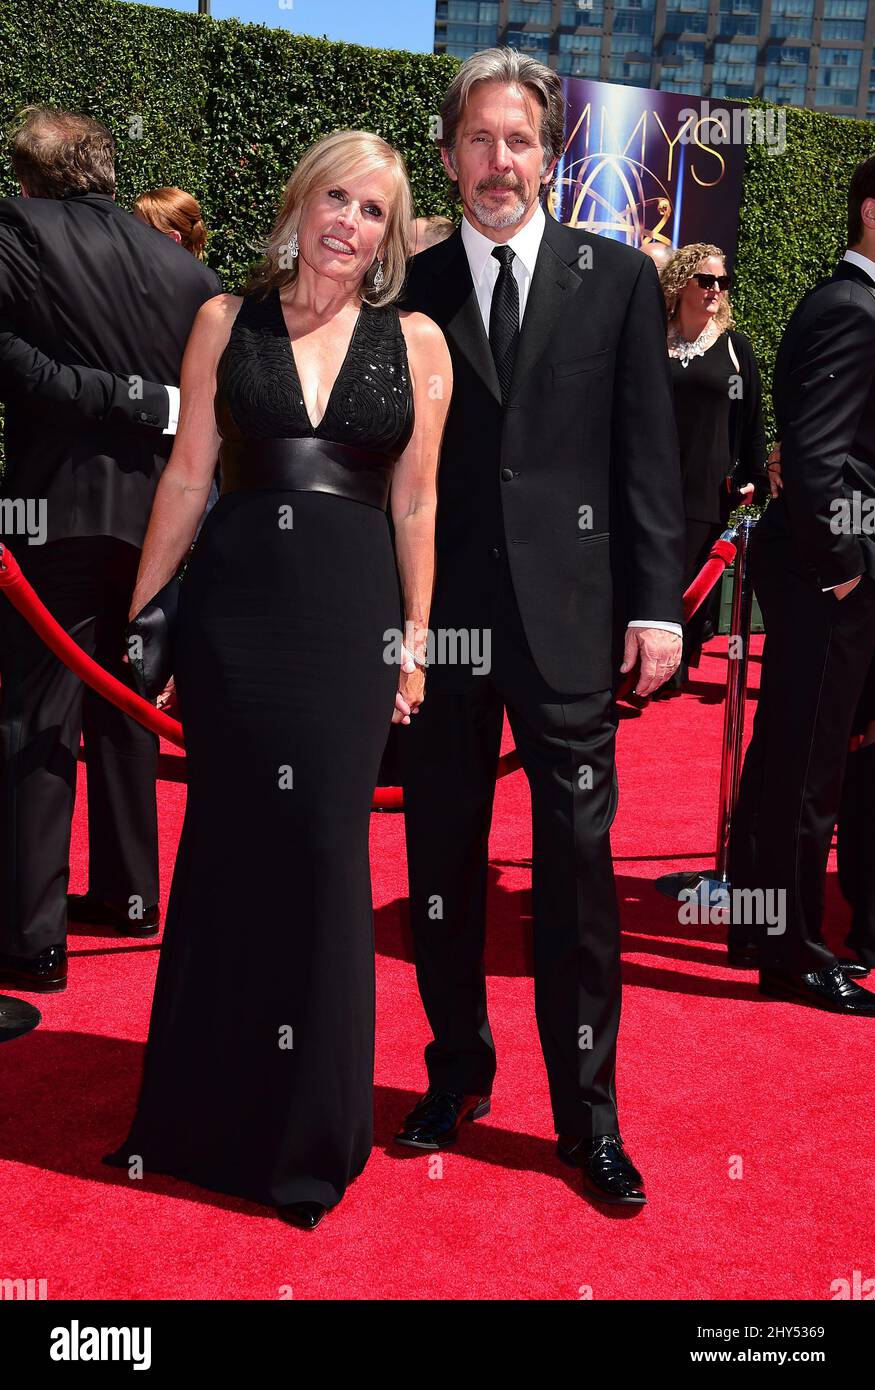 Gary Cole & Teddi Siddall attending 2014 Creative Arts Emmy Awards held at the Nokia Theatre L.A. LIVE in Los Angeles, USA. Stock Photo